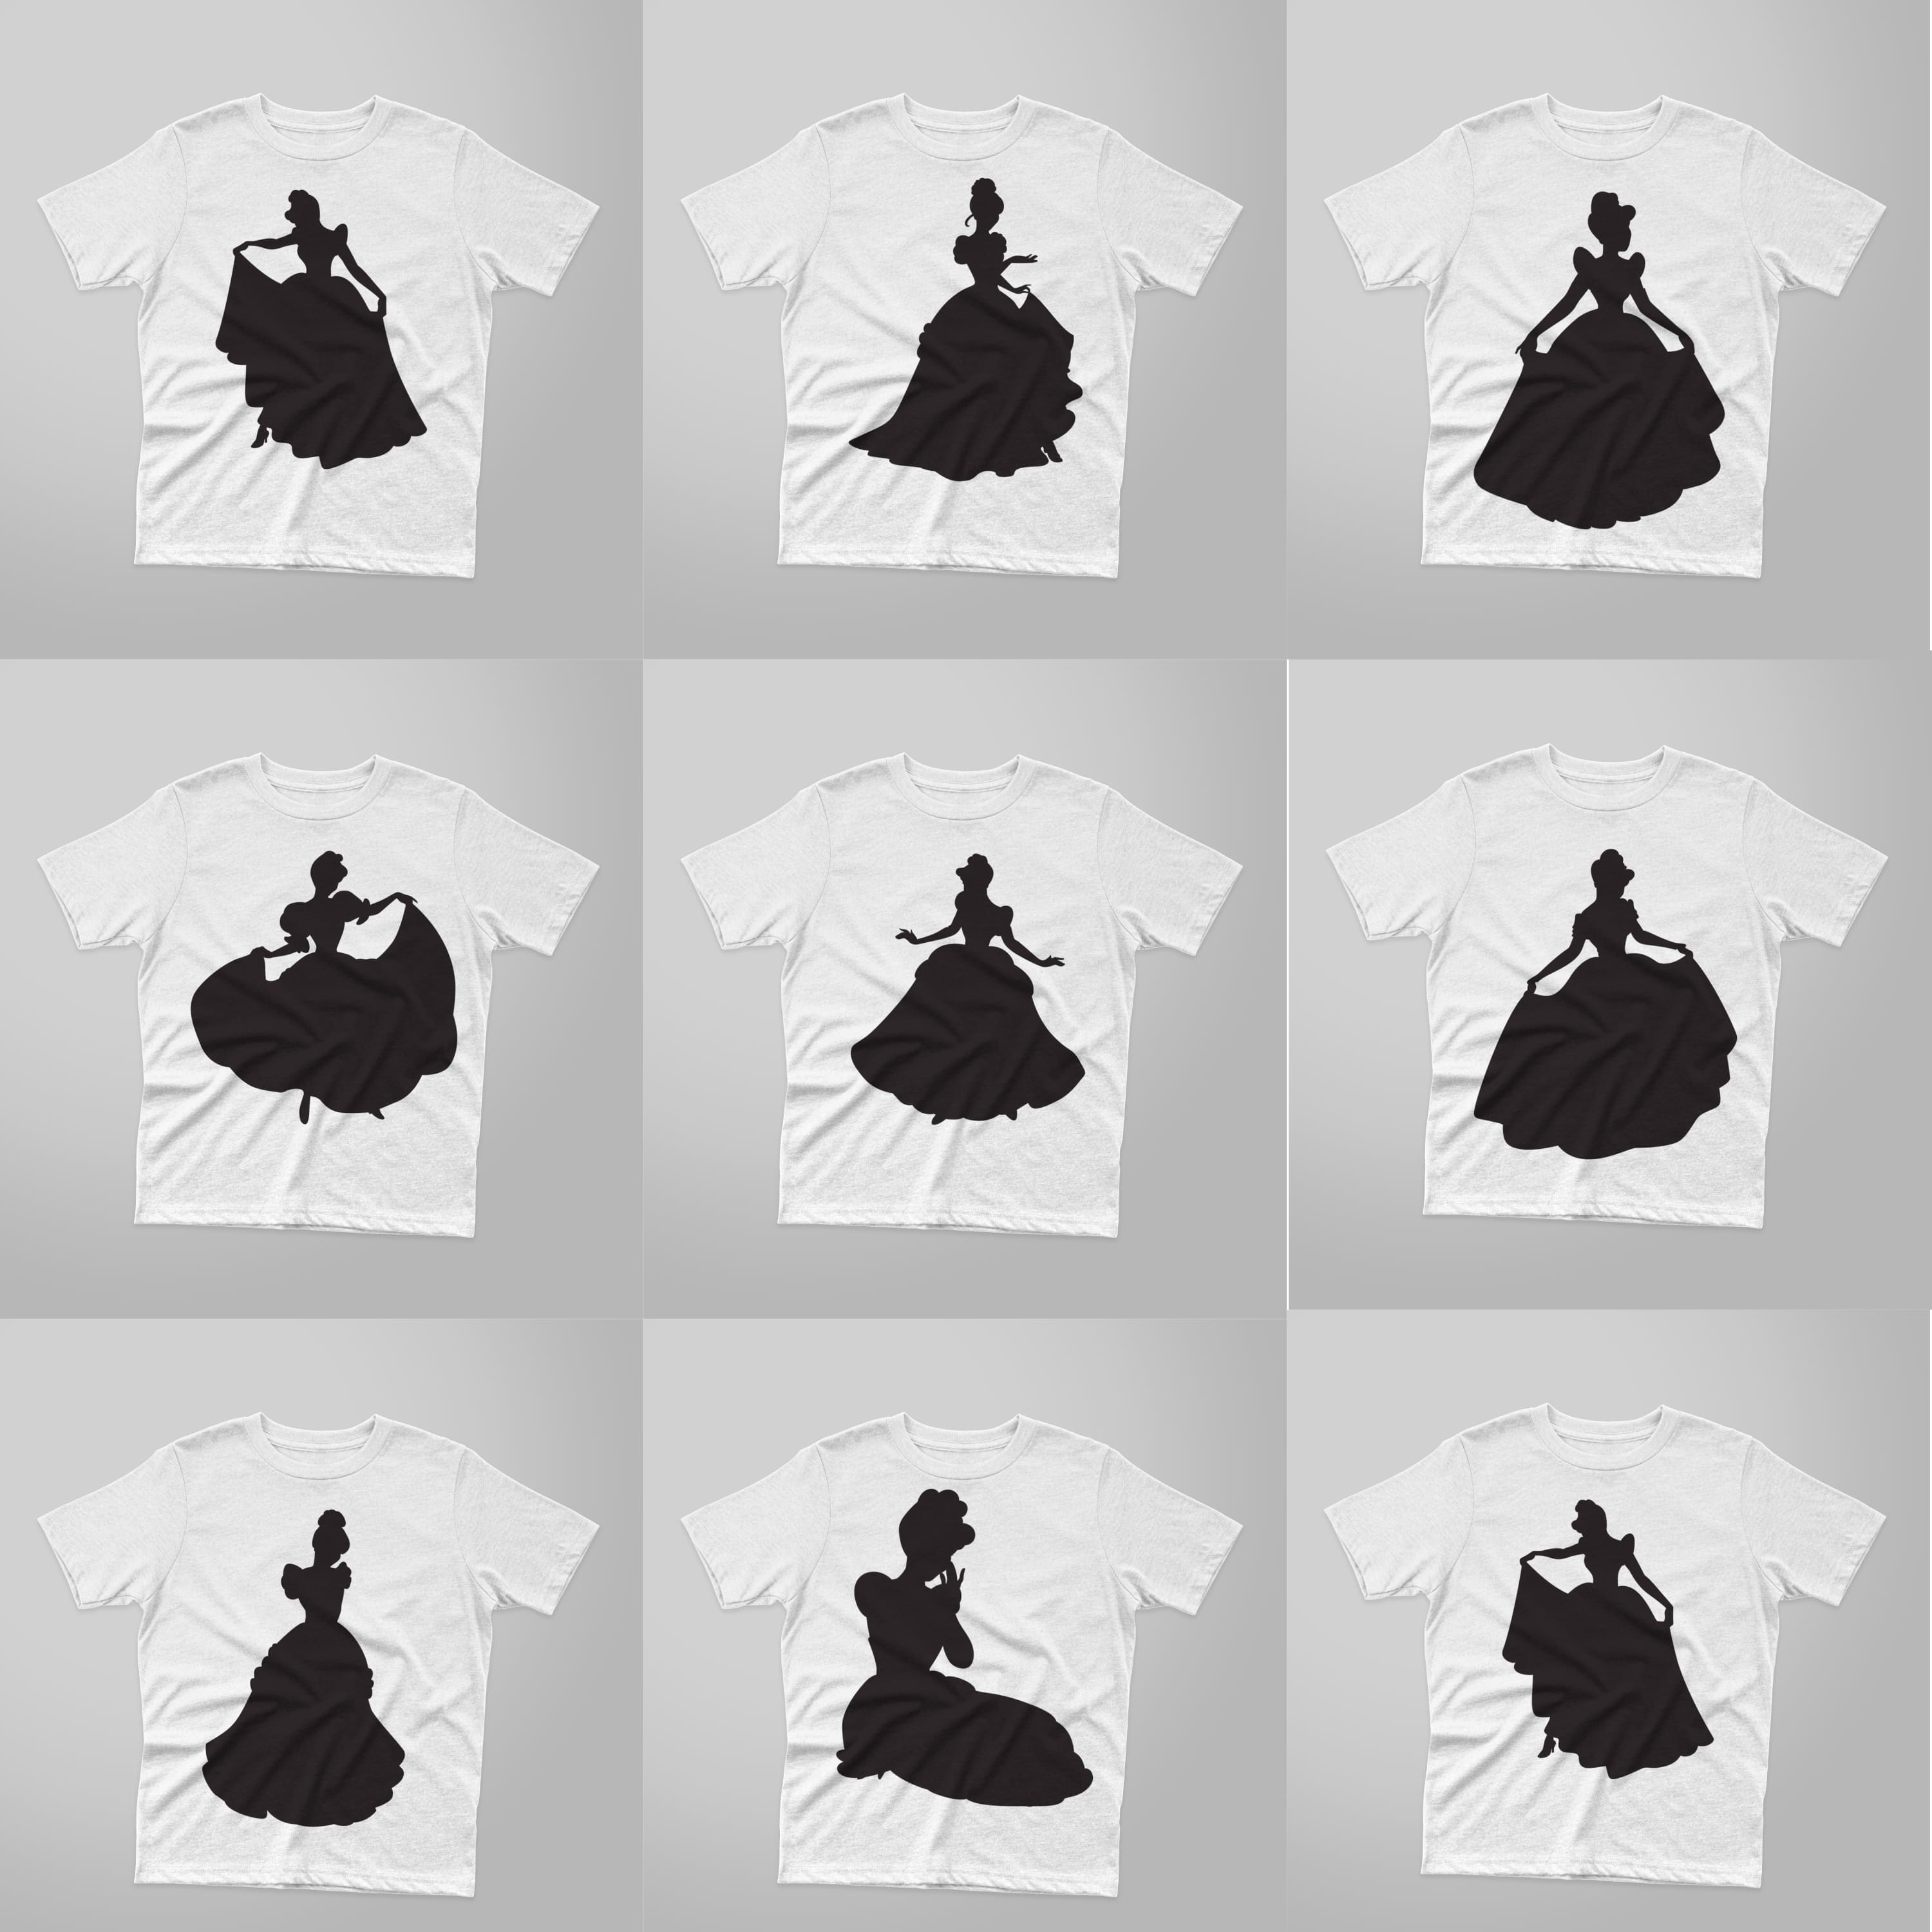 Collection of images of t-shirts with a beautiful print of the Cinderella silhouette.